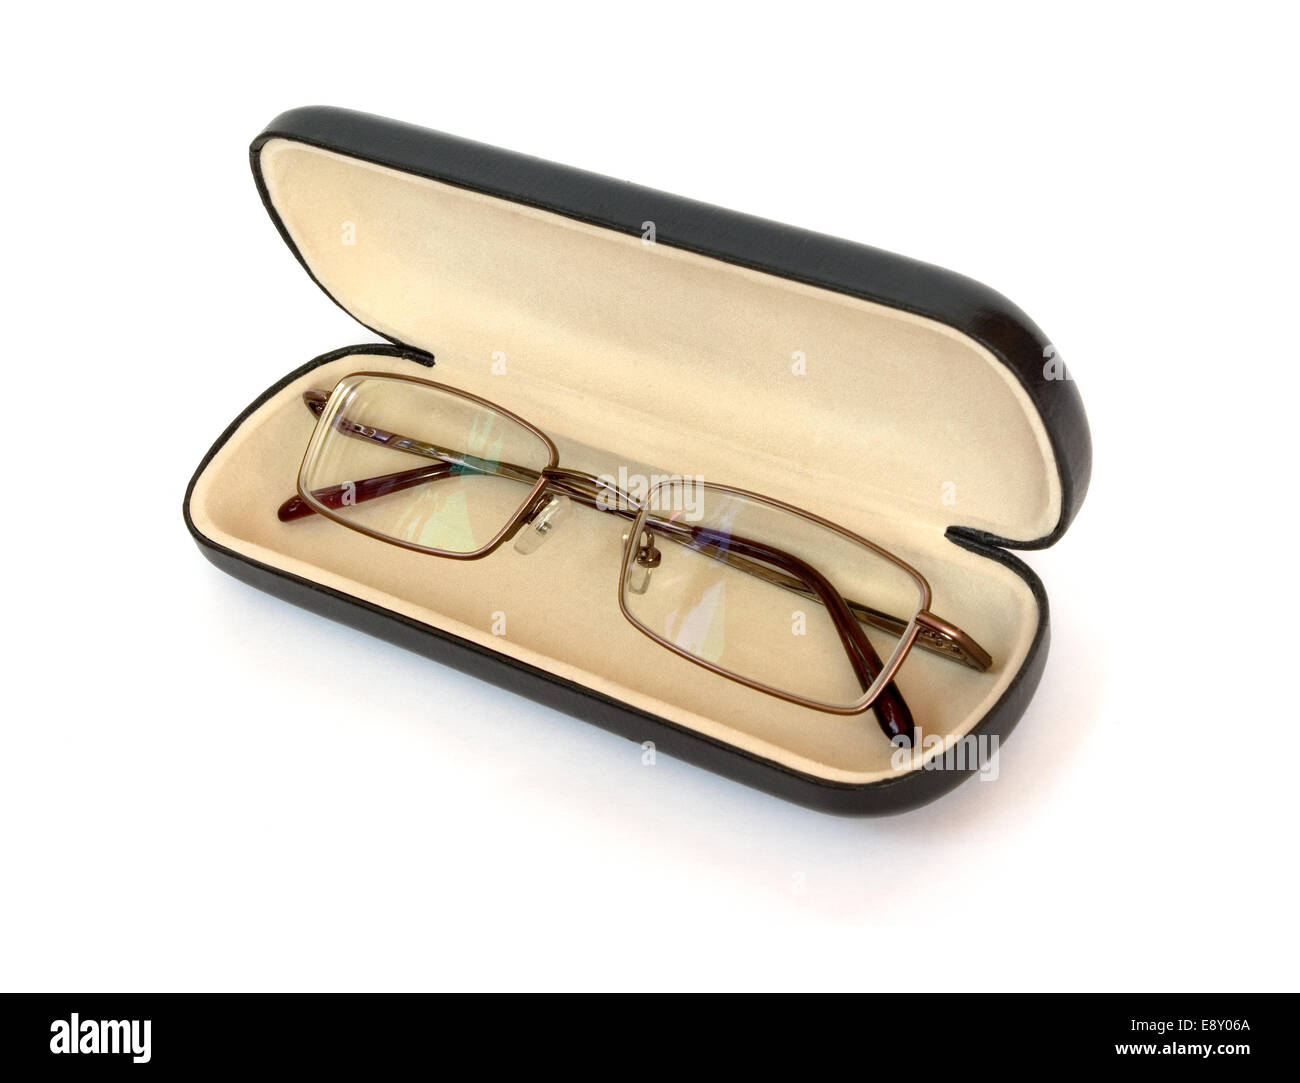 Eyewear case Cut Out Stock Images & Pictures - Alamy